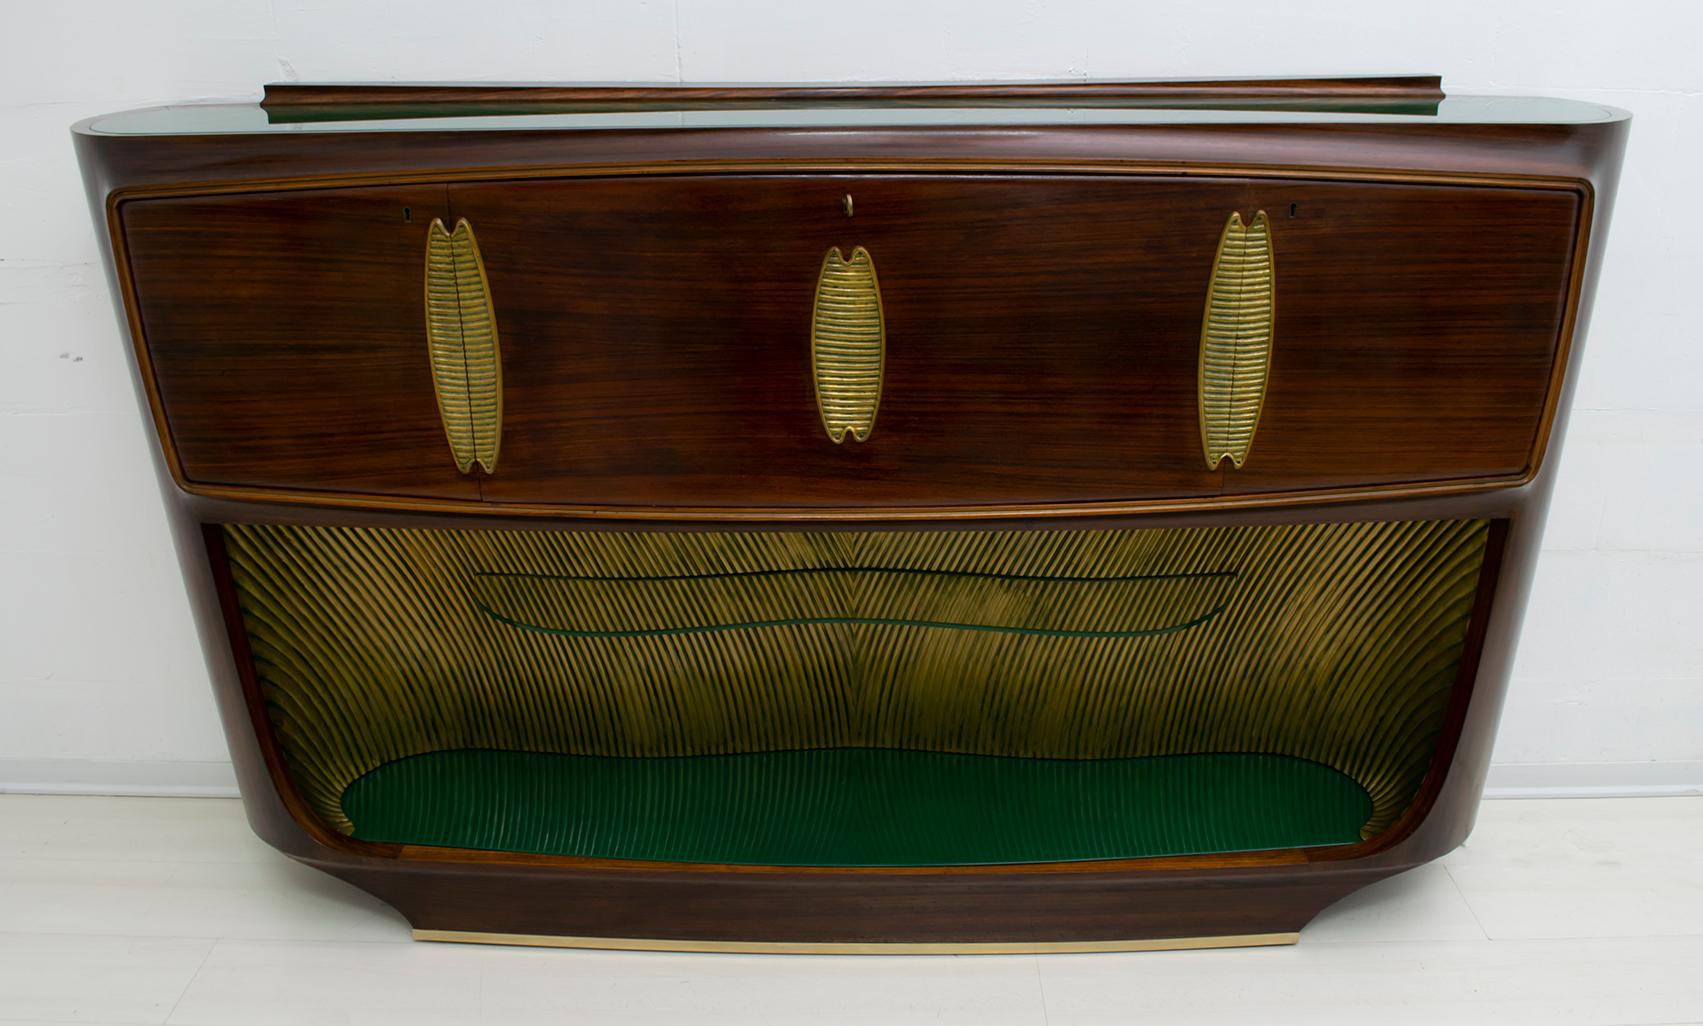 This bar cabinet was designed by the famous Italian design Vittorio Dassi, Italy, 1950, the cabinet is in walnut and green glass tops, the internal part below is in carved and gilded wood with shades of green, the base has a brass finish.